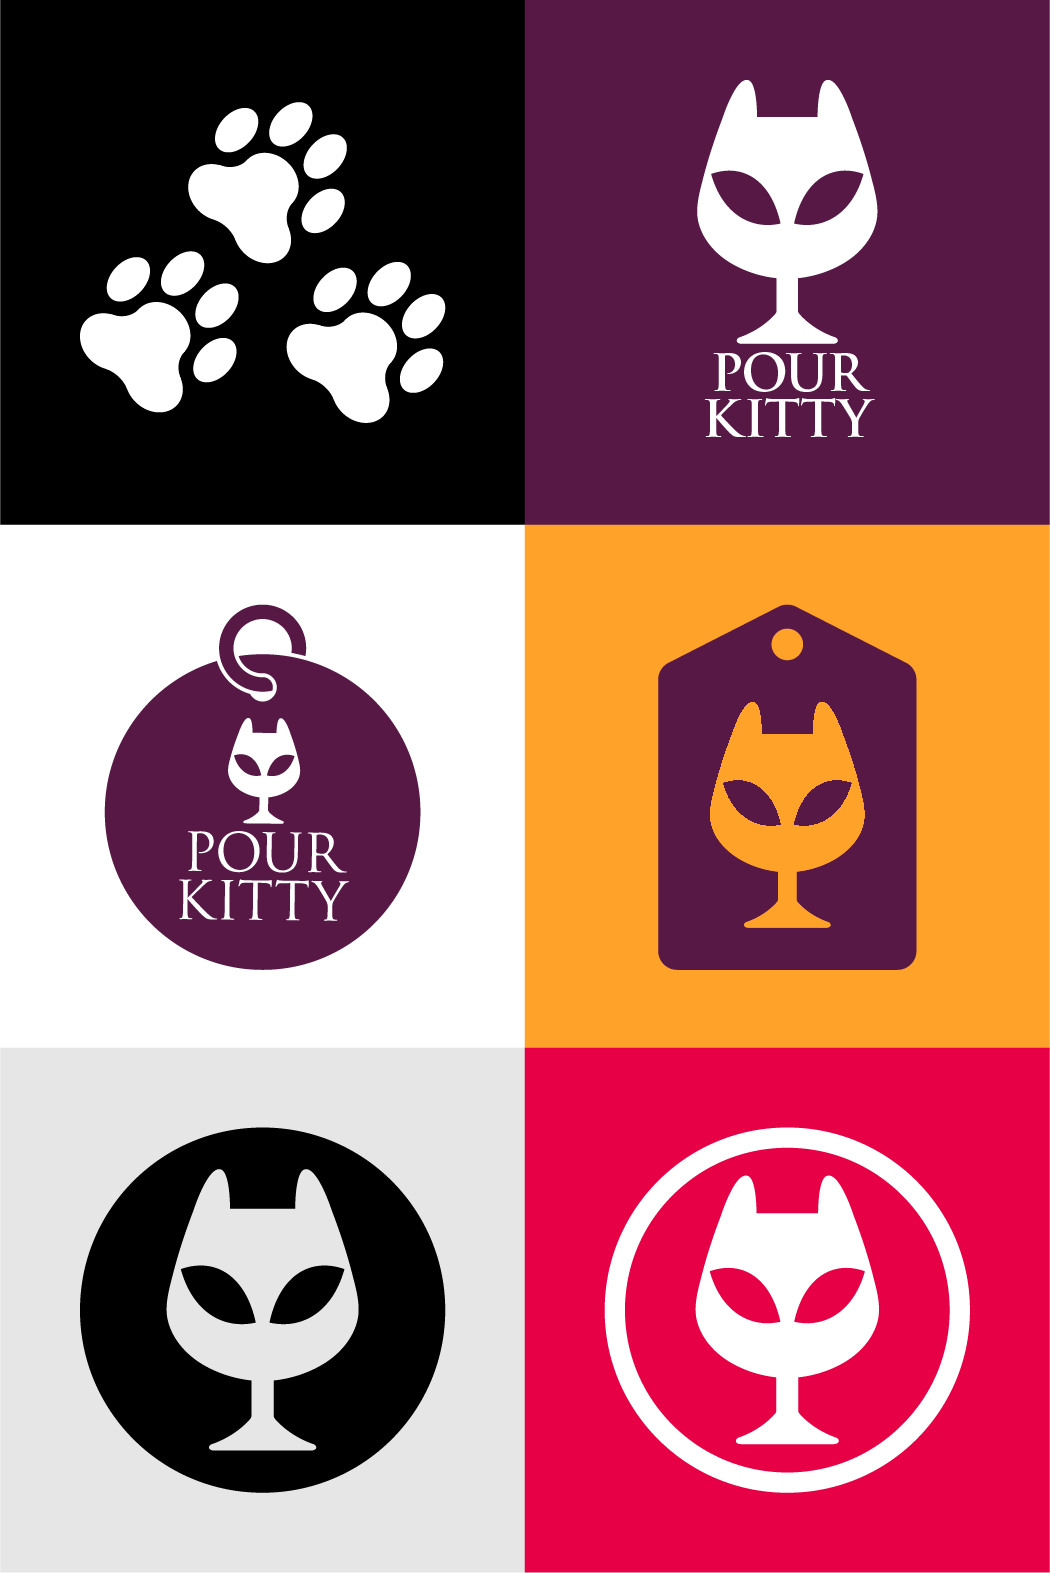 Pour Kitty website icons created by Sanczel Designs